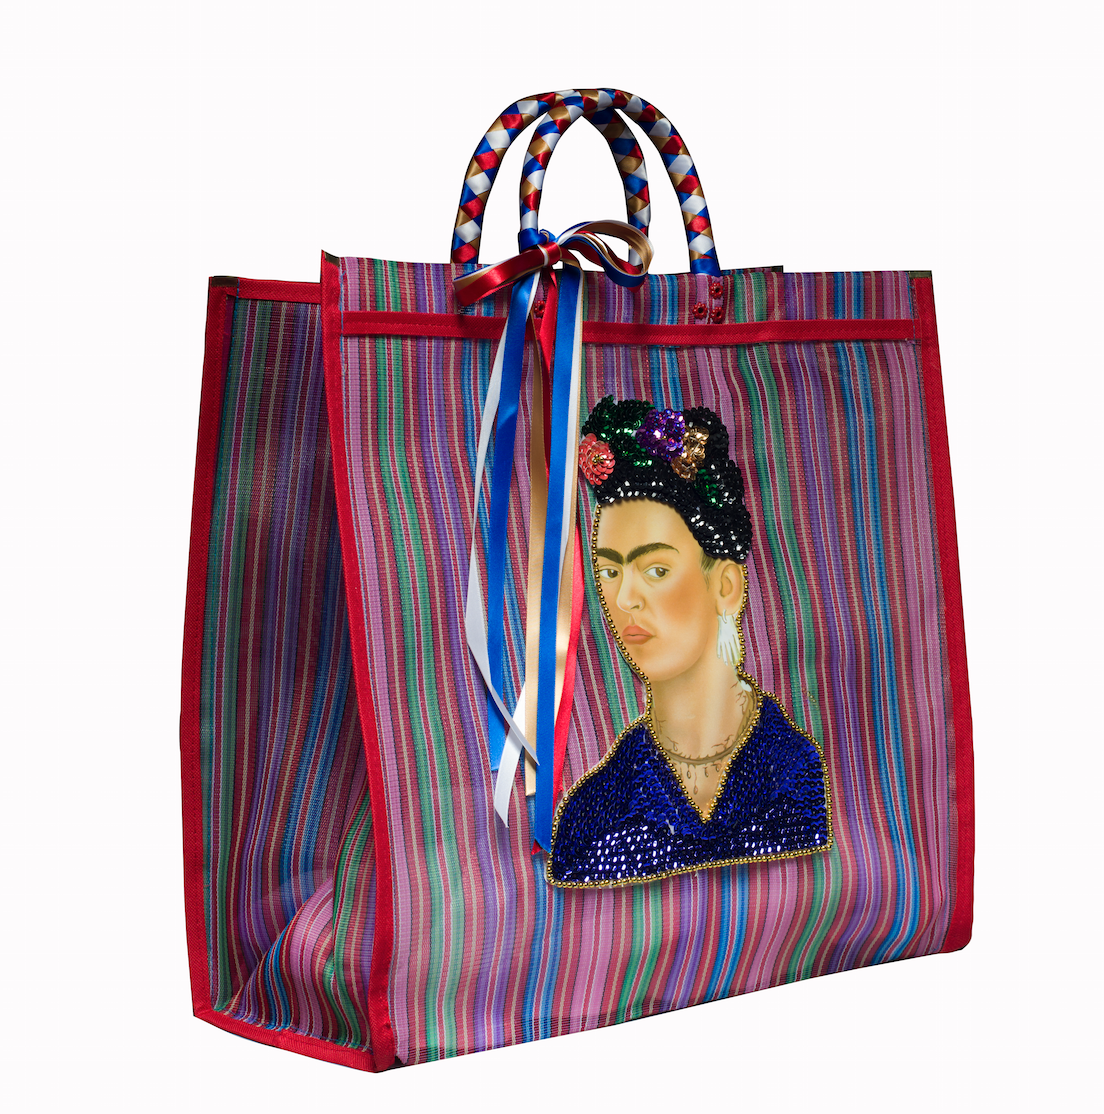 Frida Kahlo Embroidered Tote Bags - New Arrivals - Handmade Guatemalan  Imports